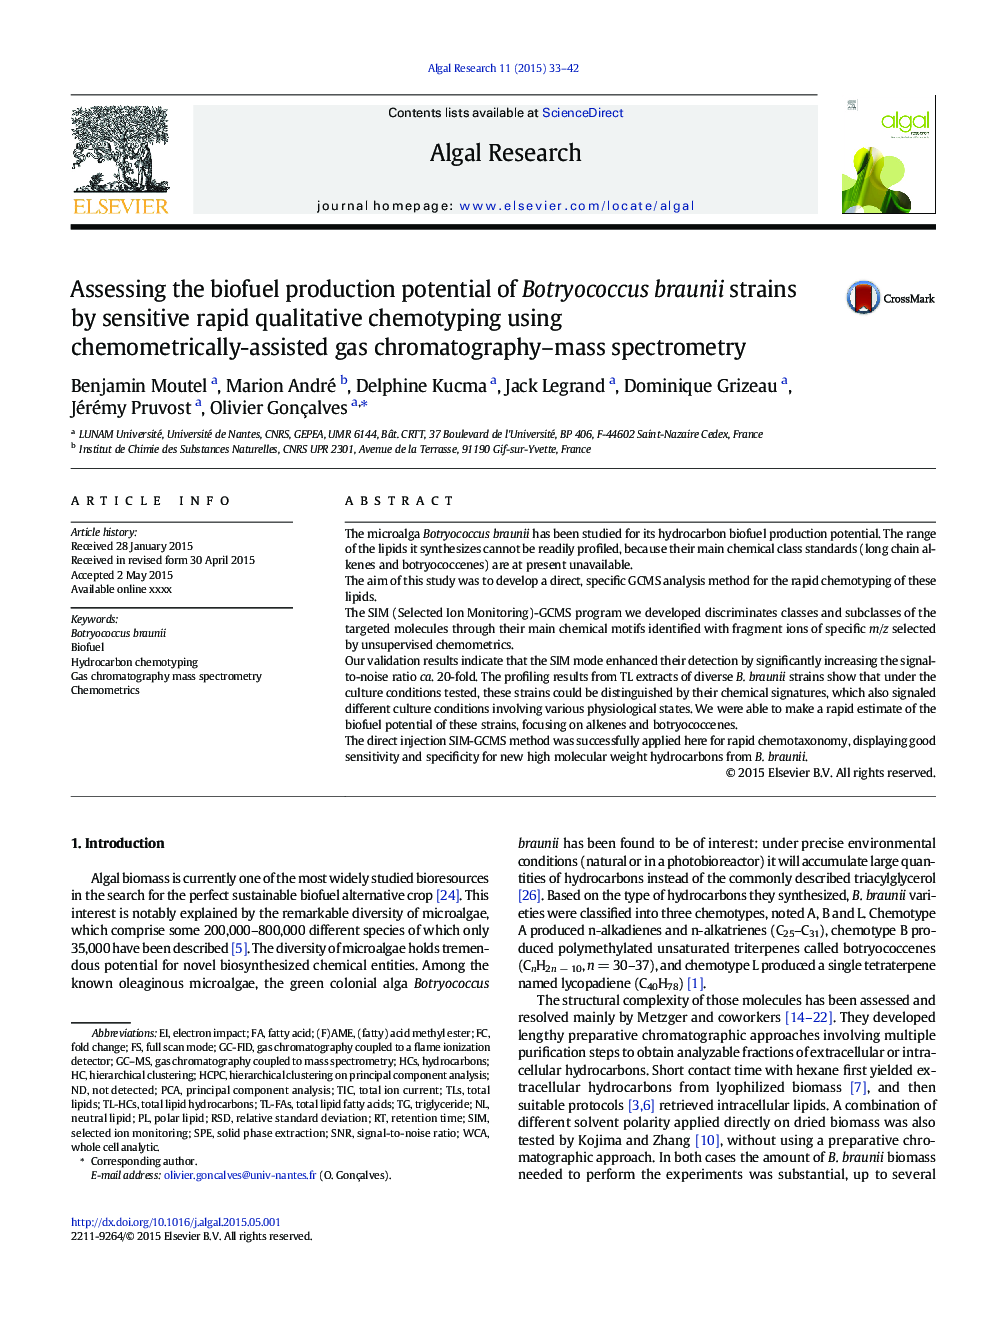 Assessing the biofuel production potential of Botryococcus braunii strains by sensitive rapid qualitative chemotyping using chemometrically-assisted gas chromatography-mass spectrometry